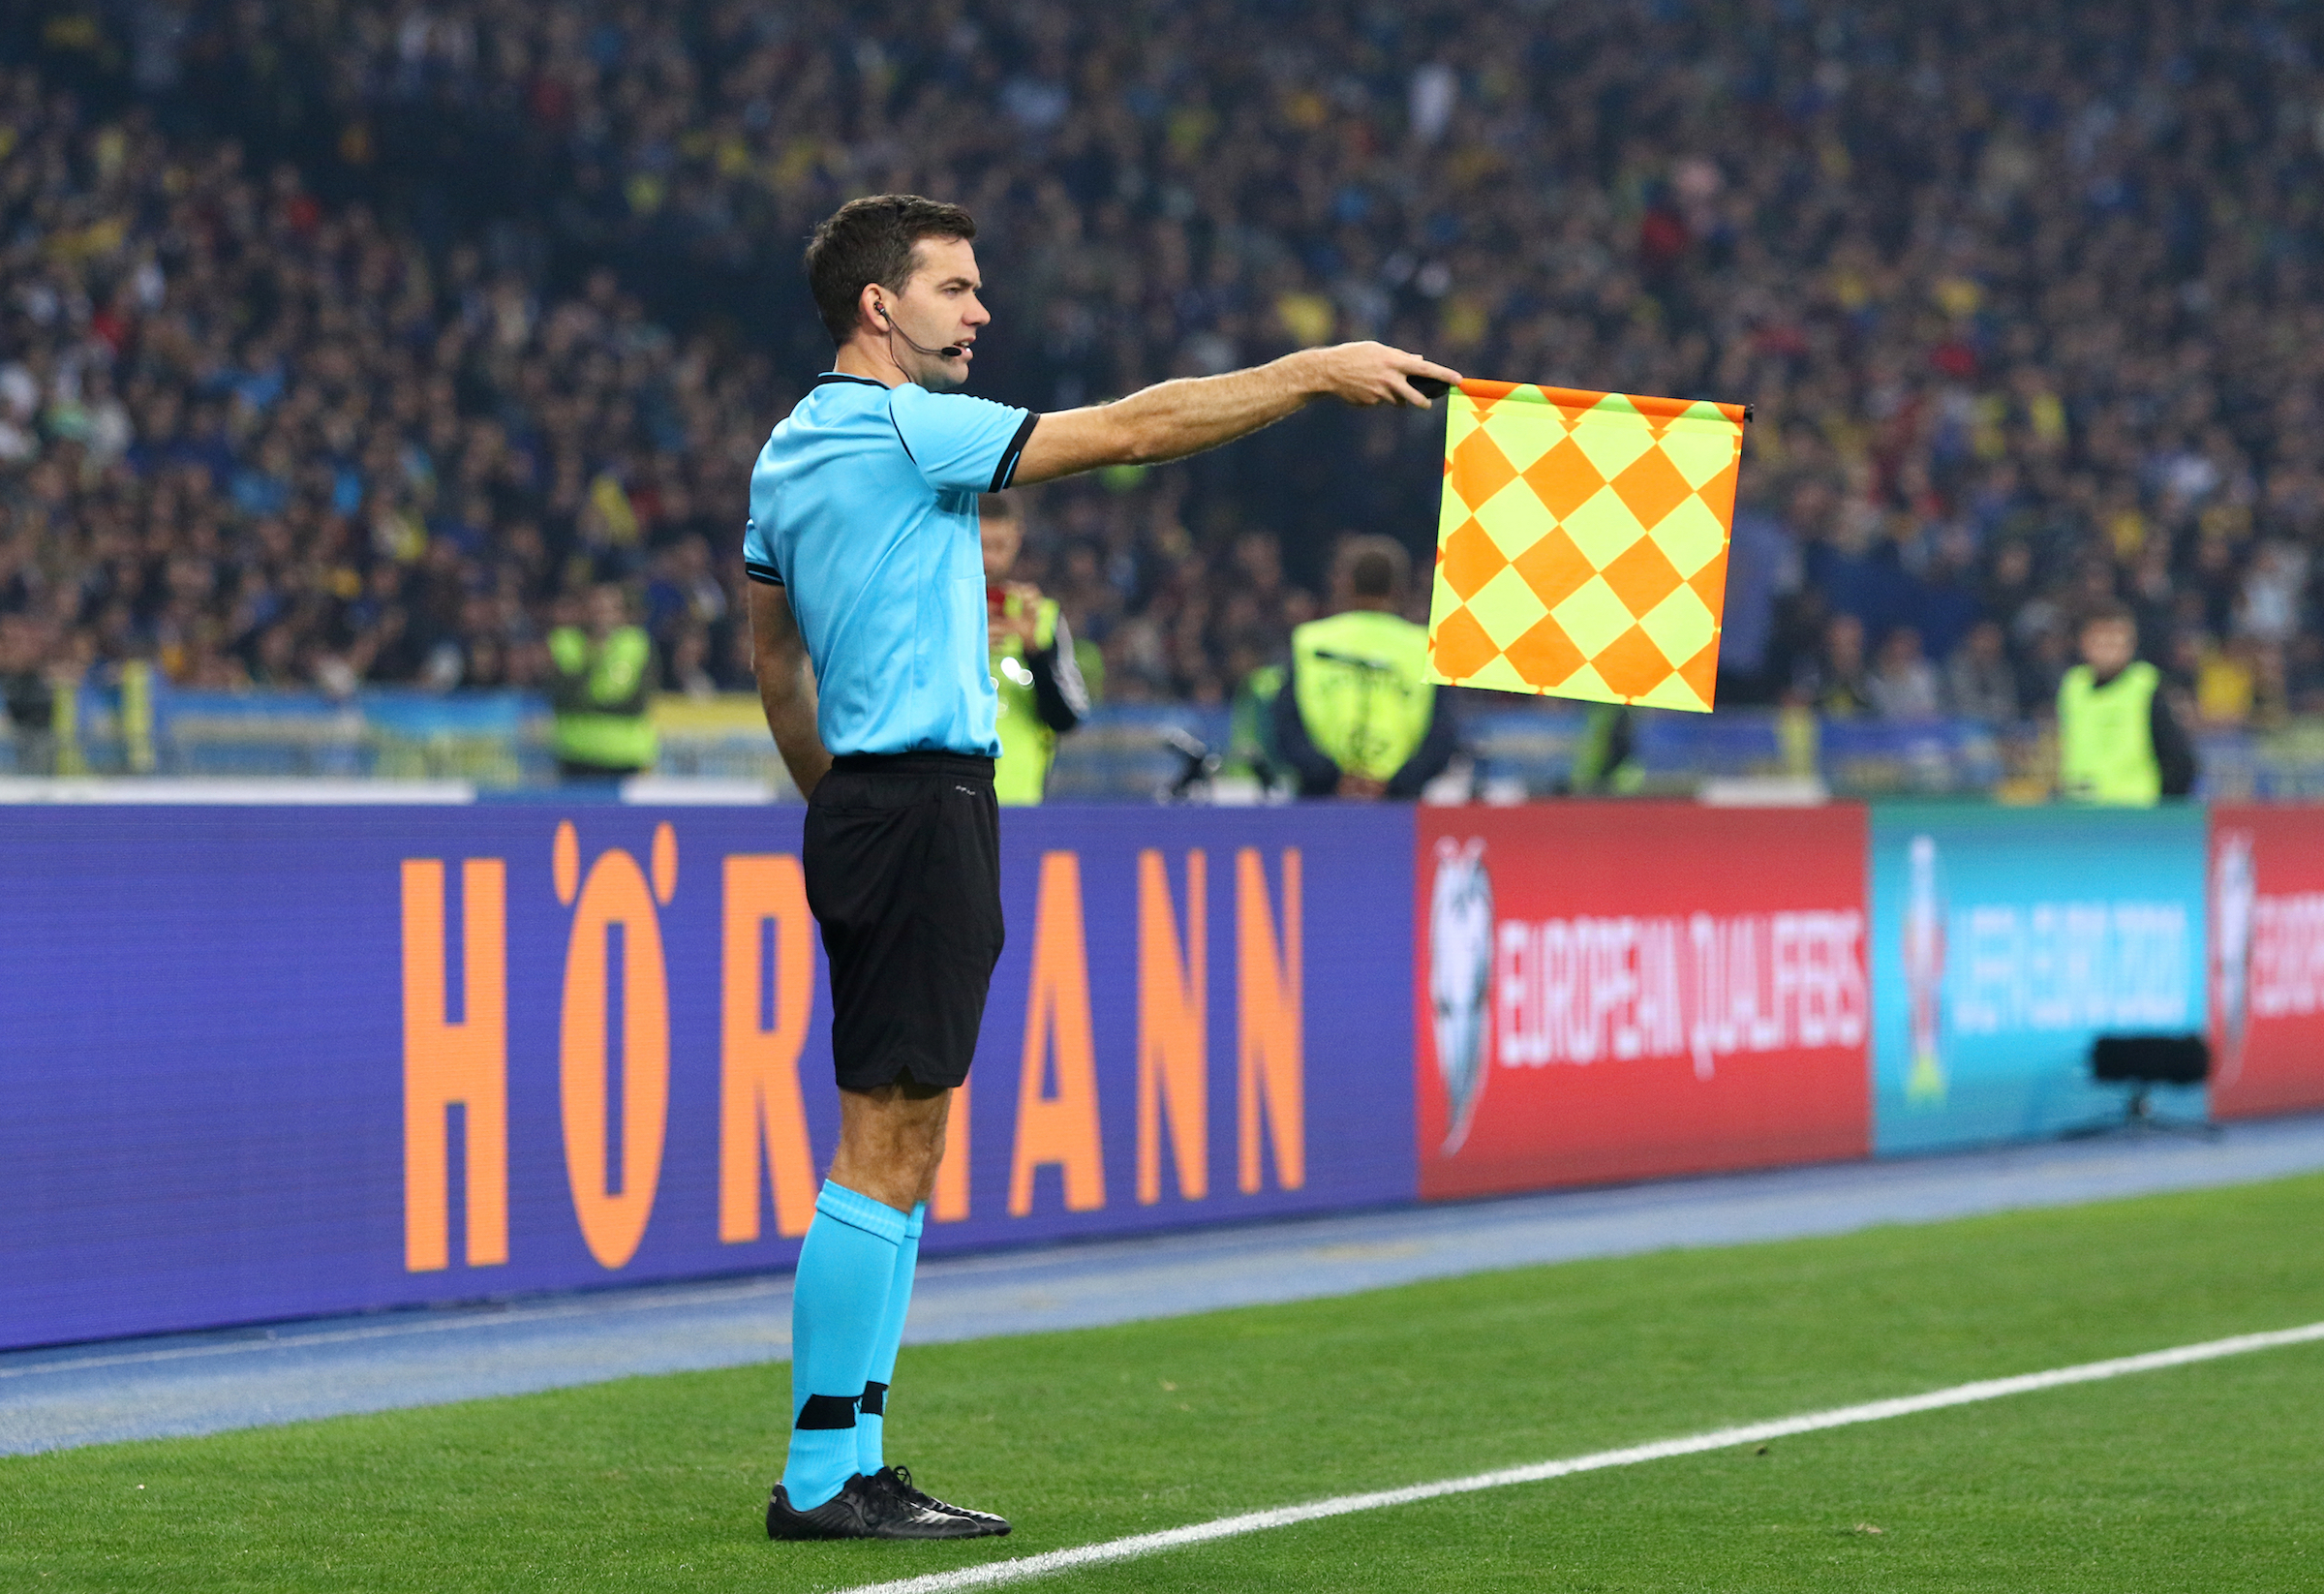 Major Offside Rule Changes Could Be Coming Soon